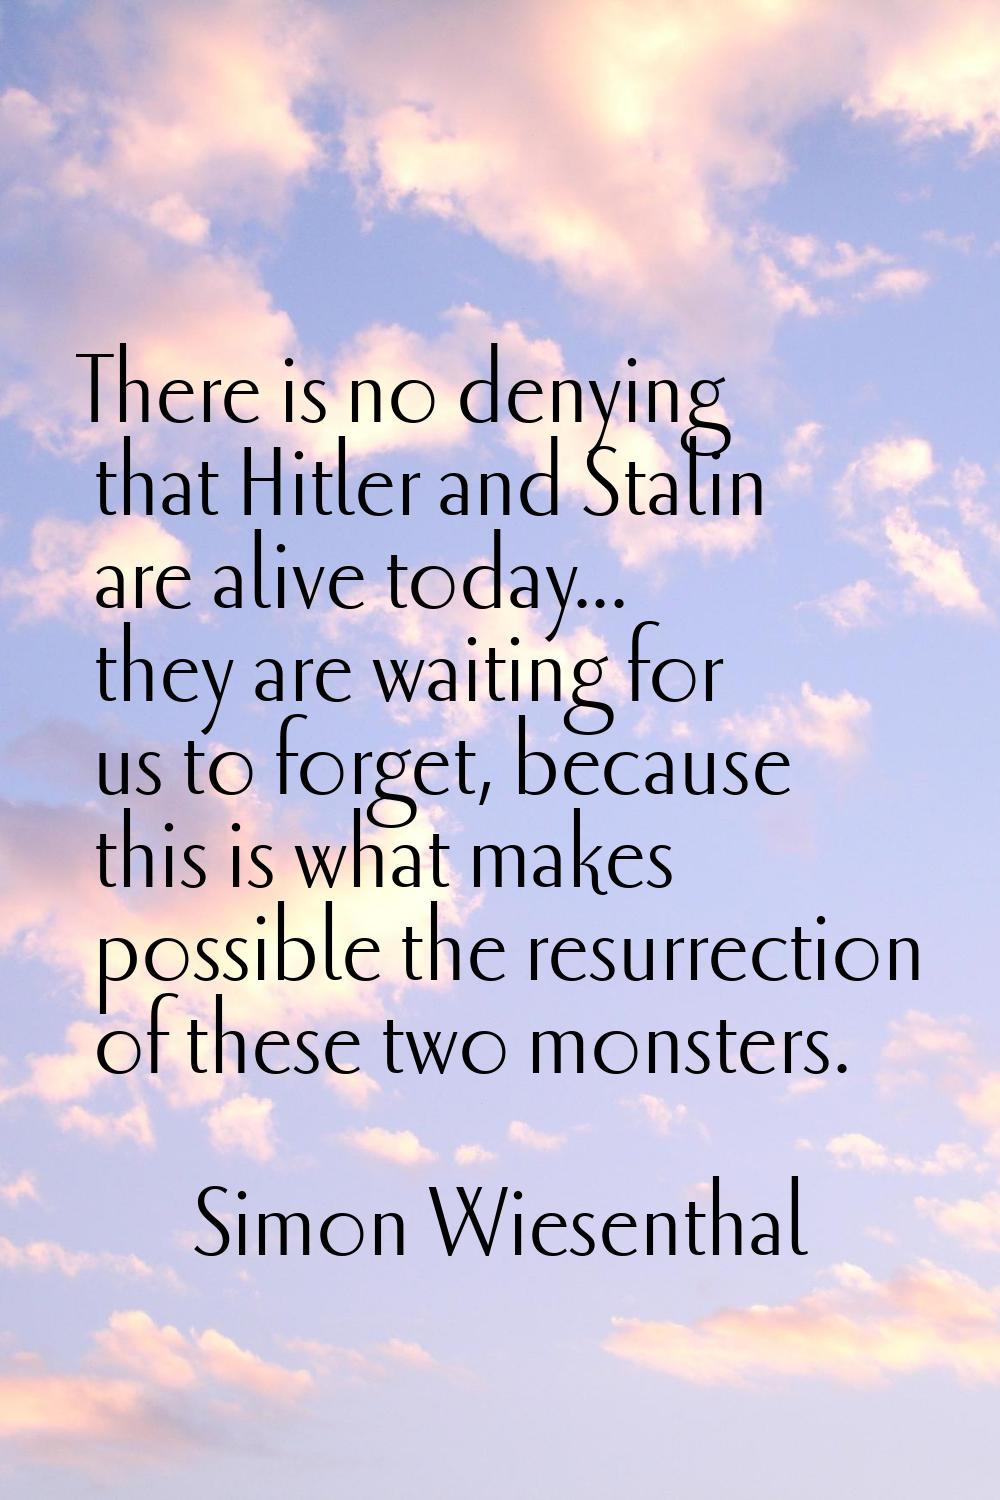 There is no denying that Hitler and Stalin are alive today... they are waiting for us to forget, be